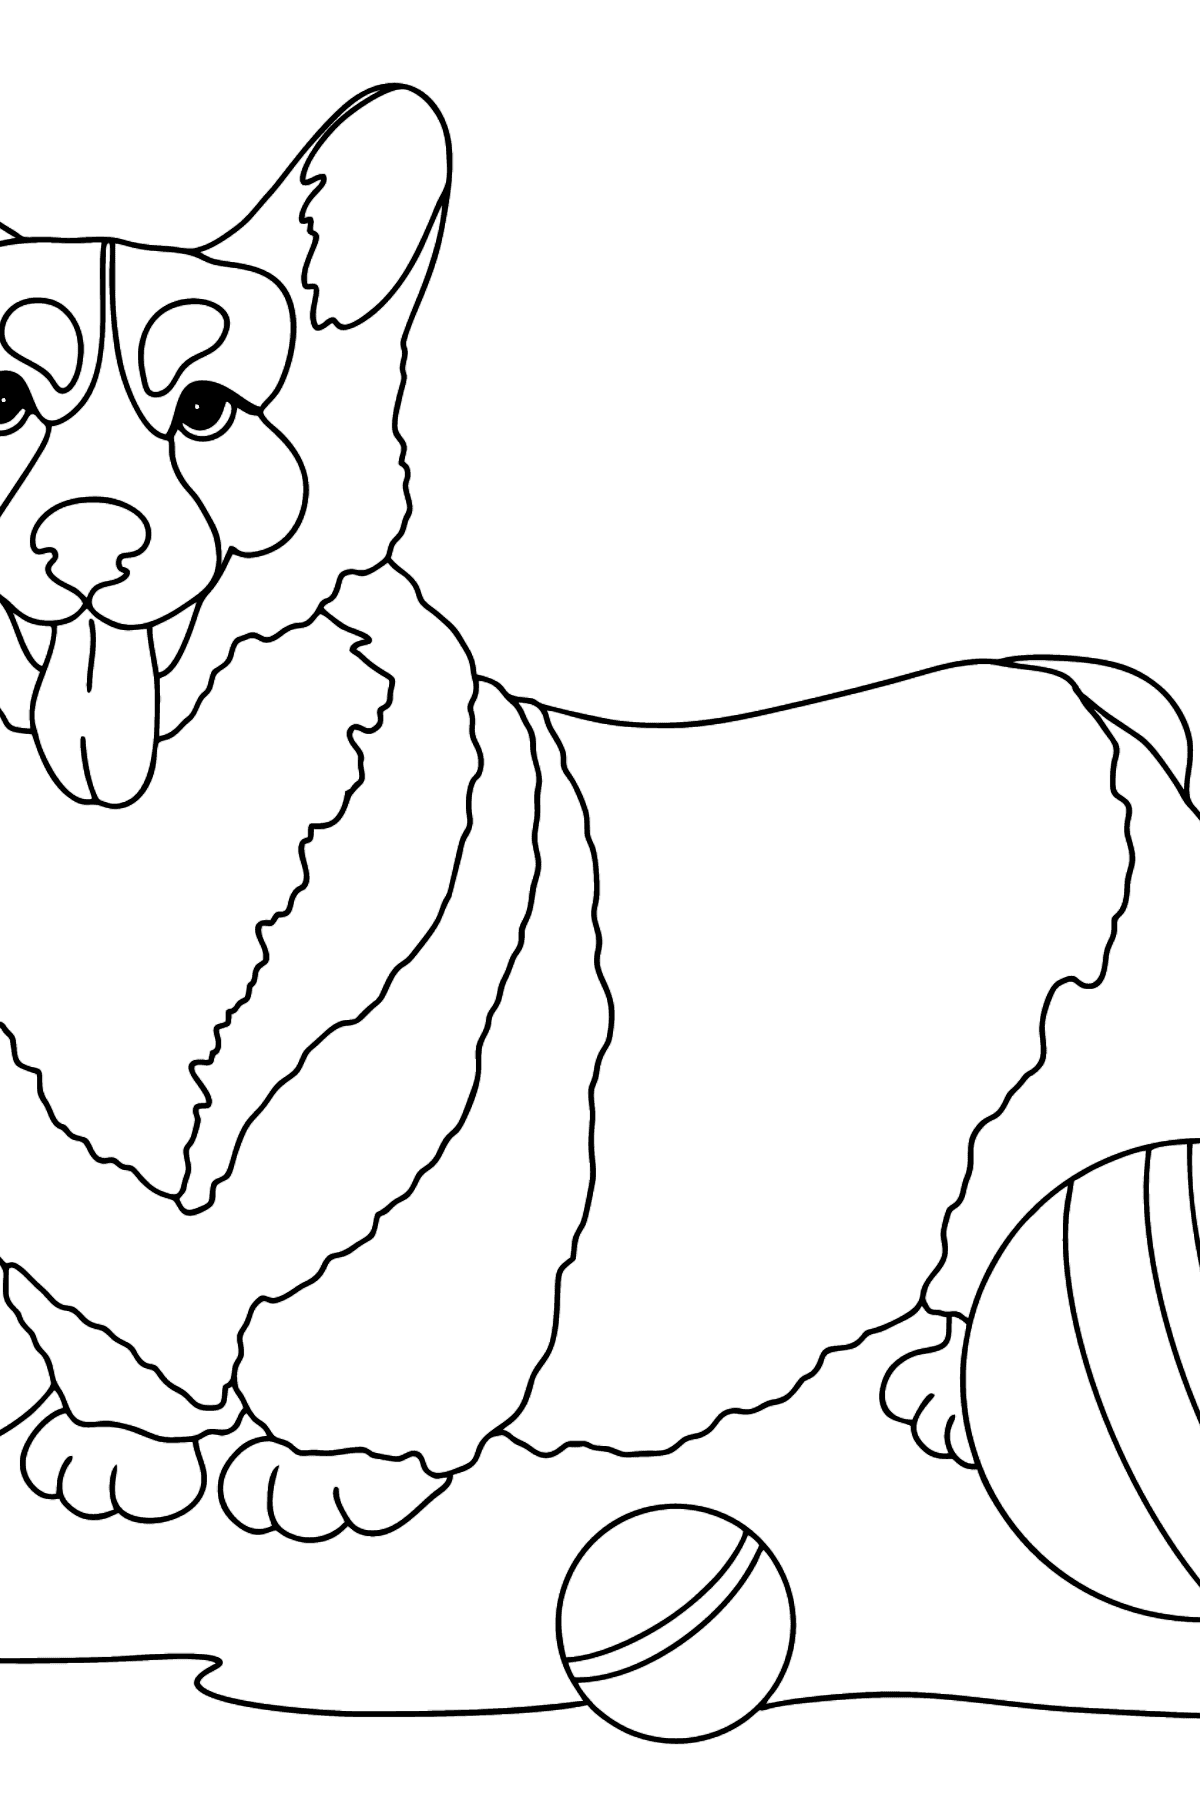 Corgi coloring page - Coloring Pages for Kids